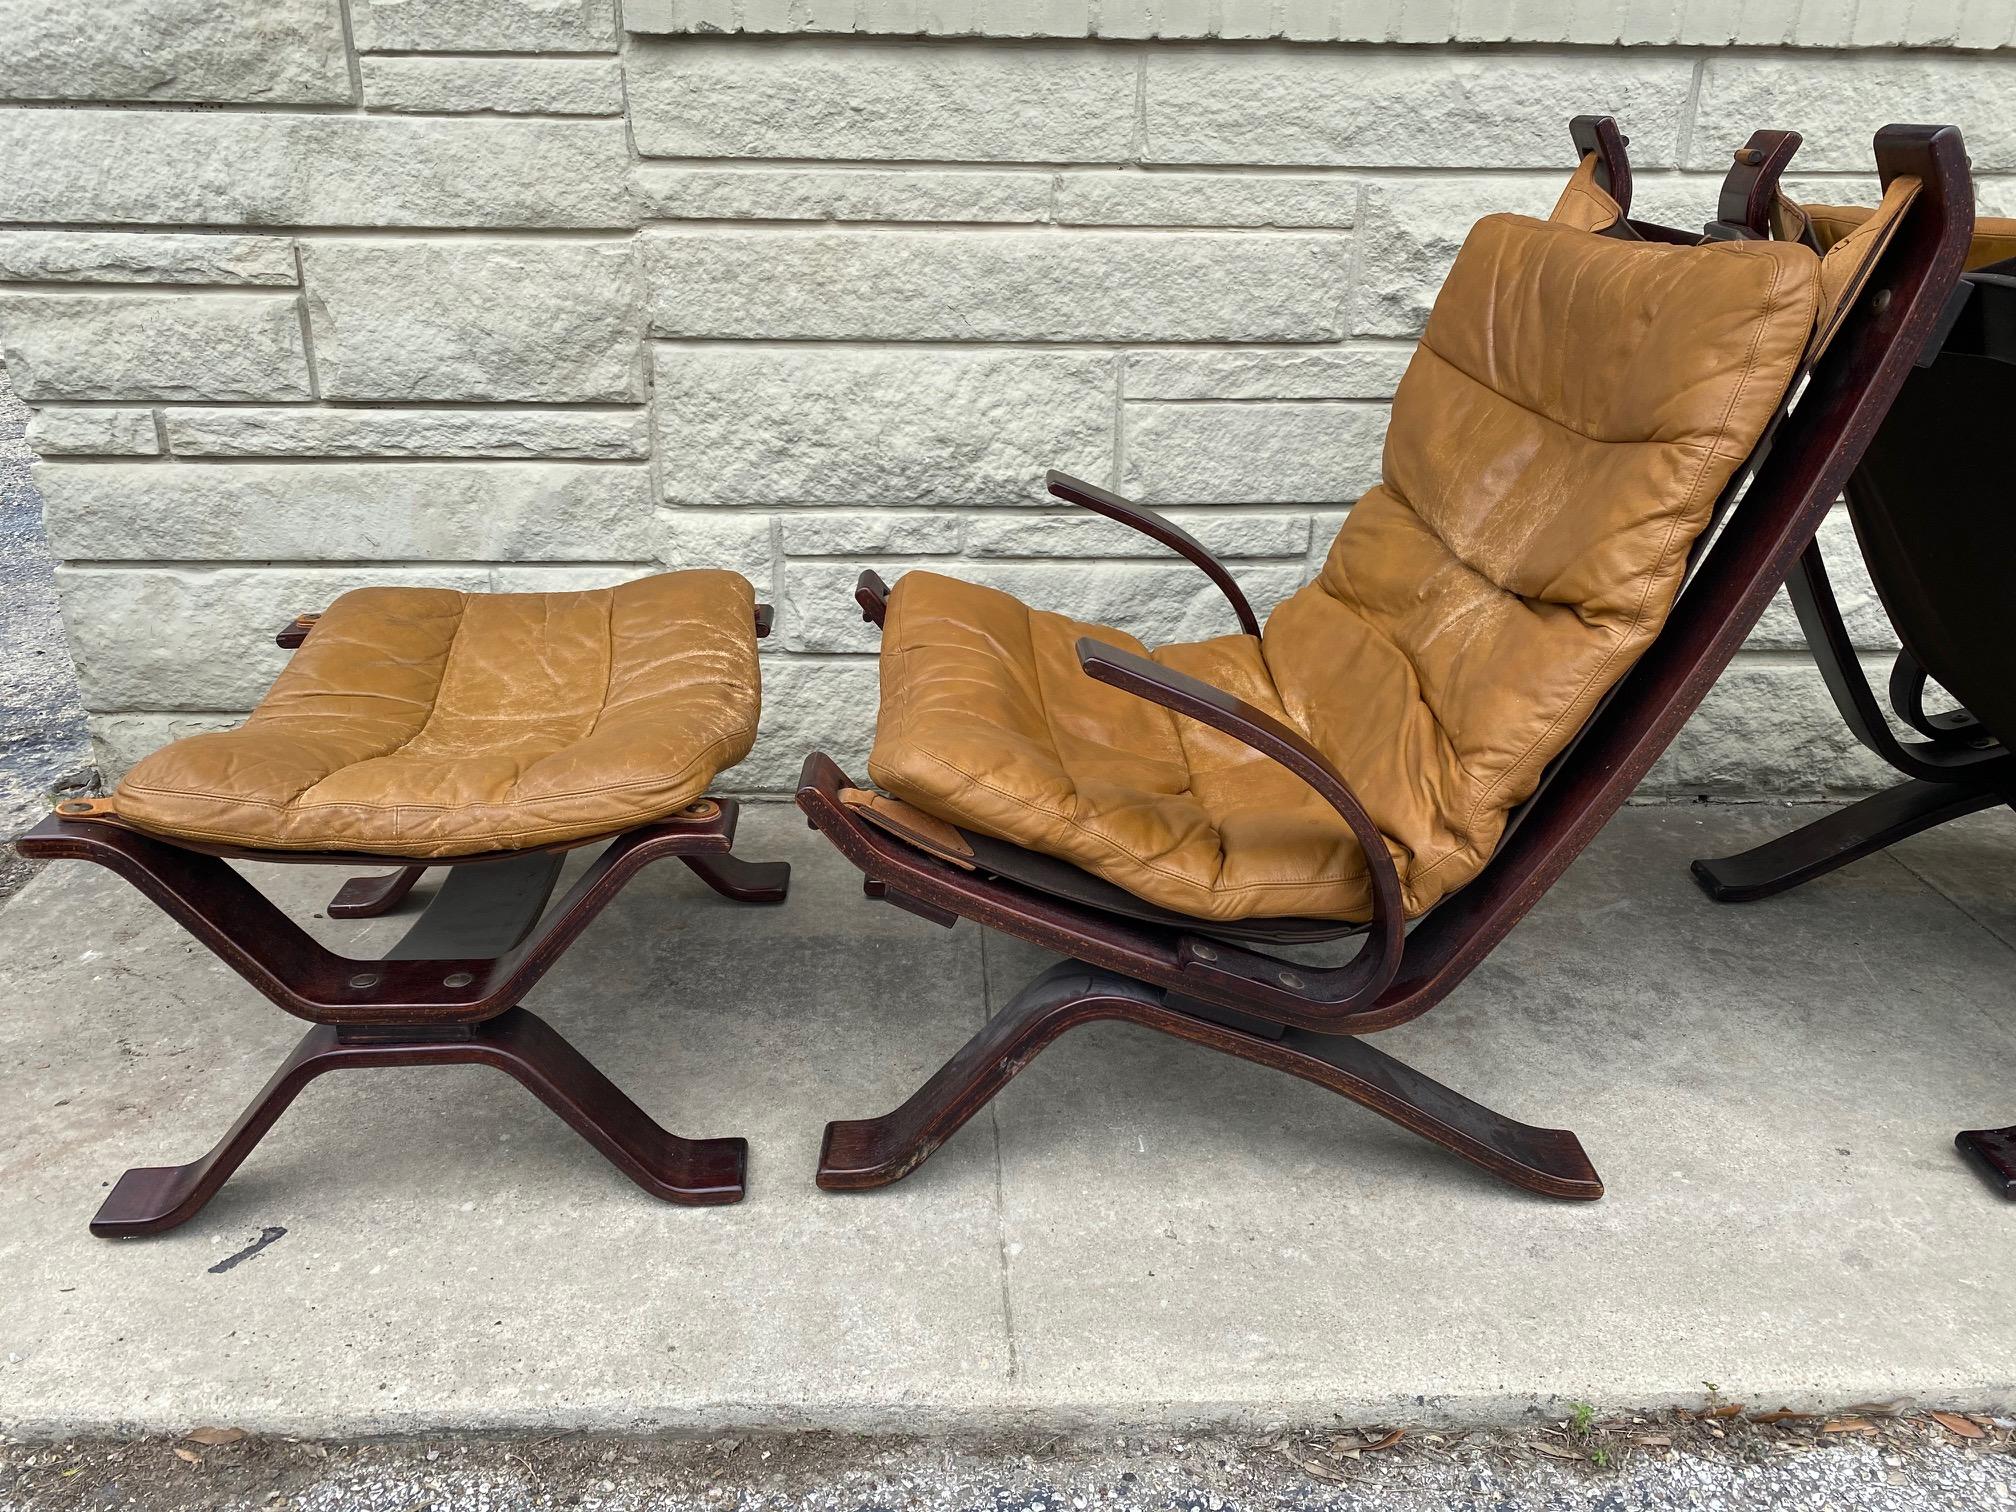 Pair of vintage Danish Focus armchair in light brown leather, wooden frame with ottoman foot-stool are in good condition. Bramin worked with many respected designers, producing a wide range of visually appealing modern furniture for the home and